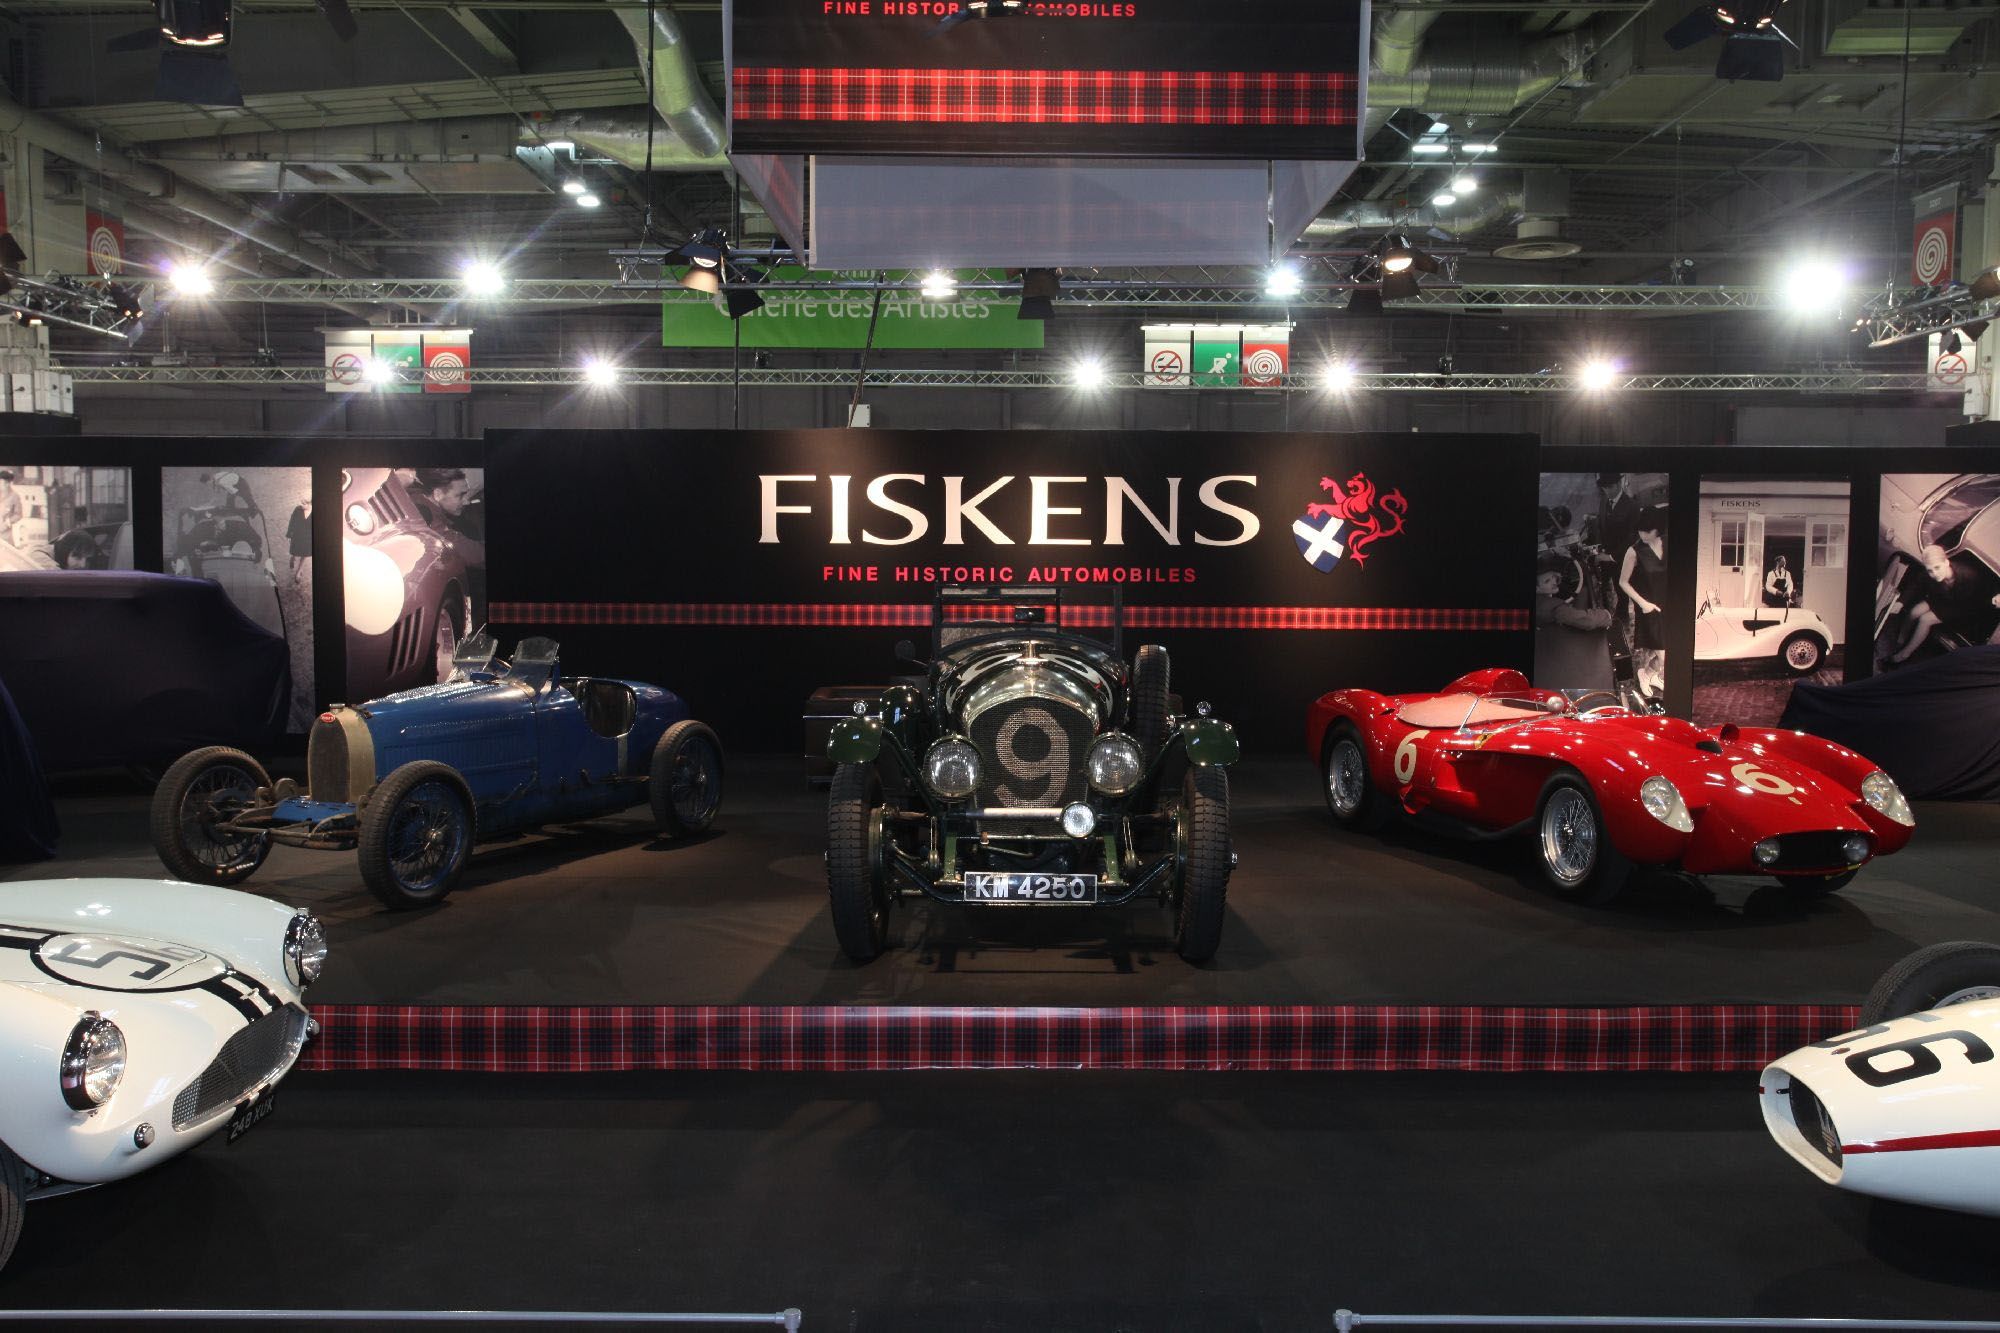 Fiskens enjoy another successful year at Retromobile